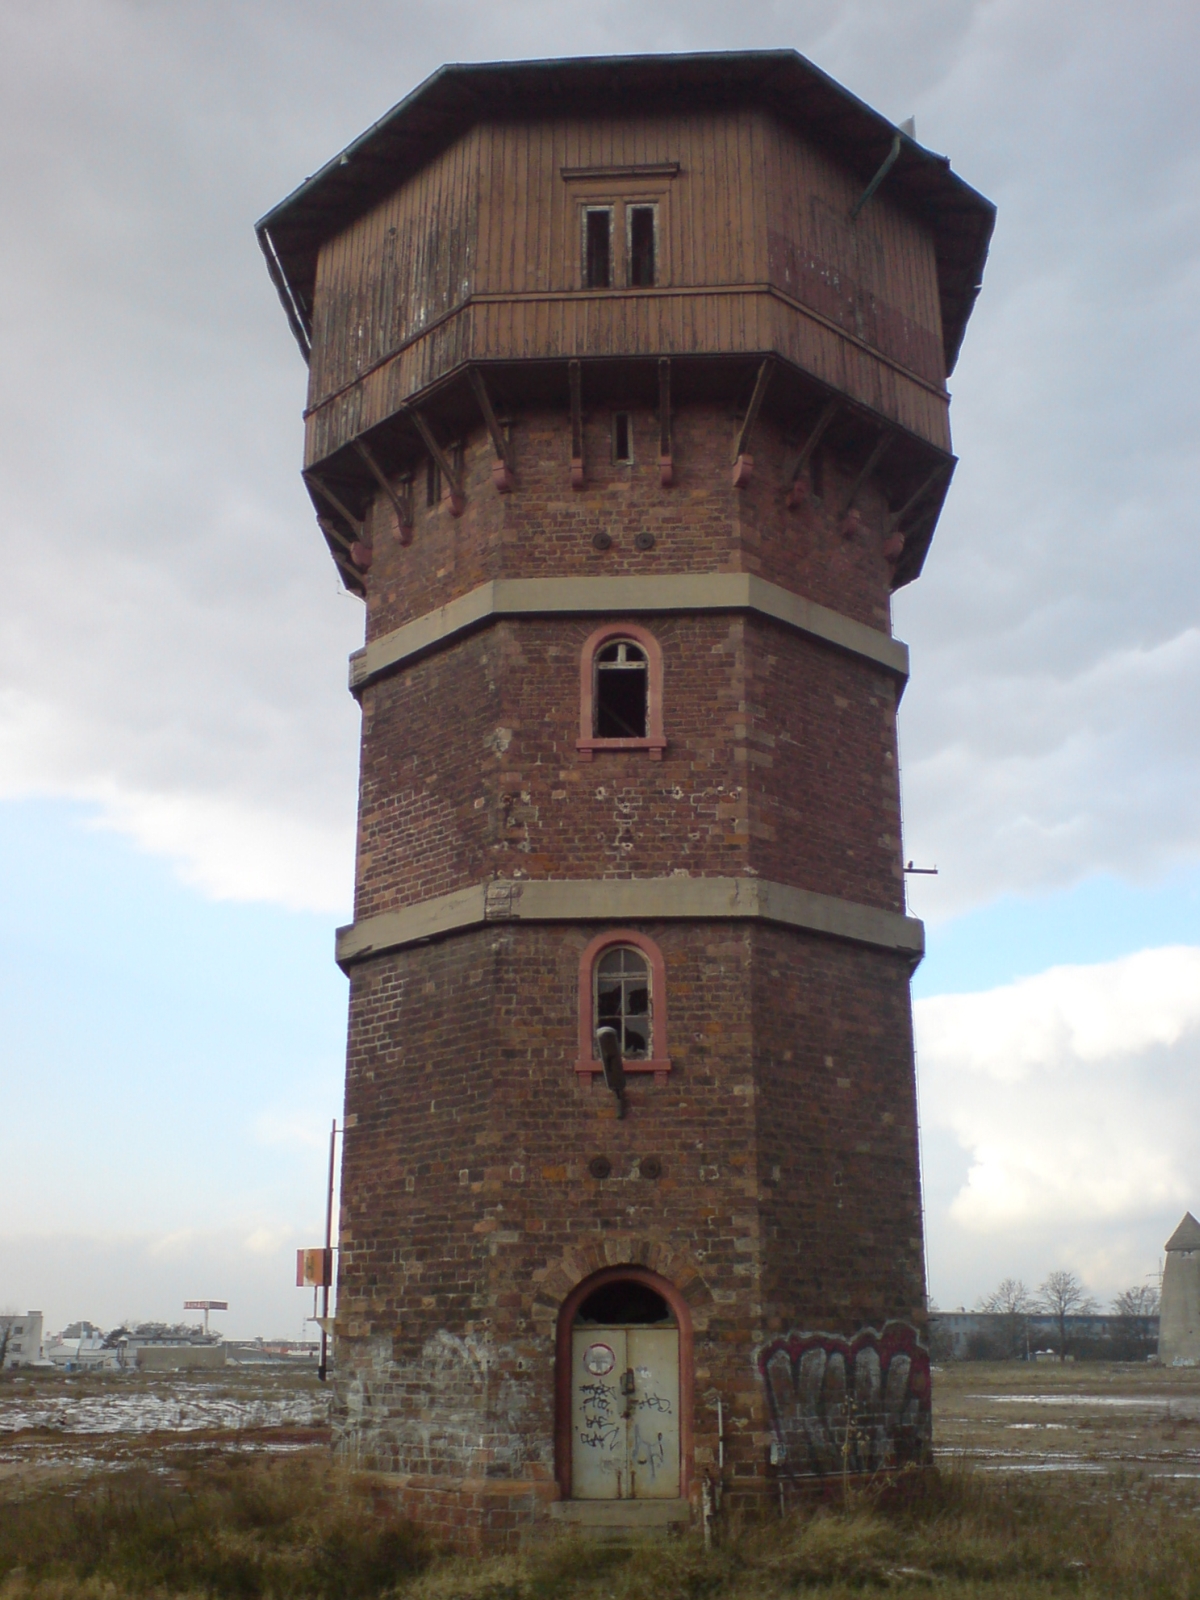 File:Old Water Tower, Old Rail Yards Darmstadt.jpg - Wikimedia Commons